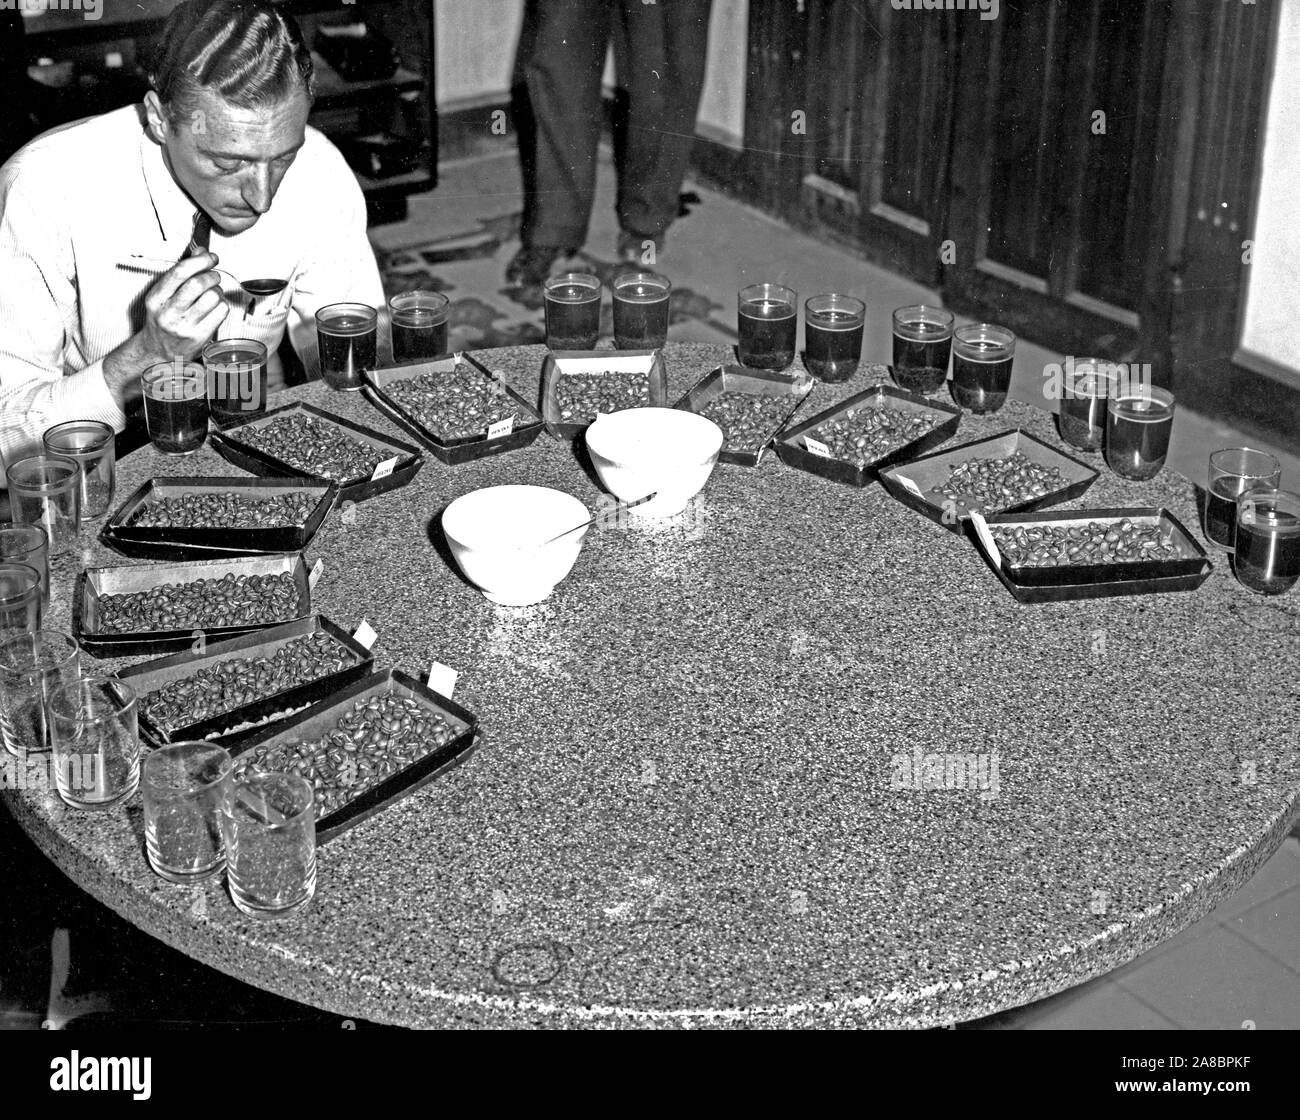 Coffee samples from various areas are being tested for taste and aroma by Sr. Aldo Cabella. Oficina Central de Cafe, Guatemala City, Guatemala.1947 Stock Photo